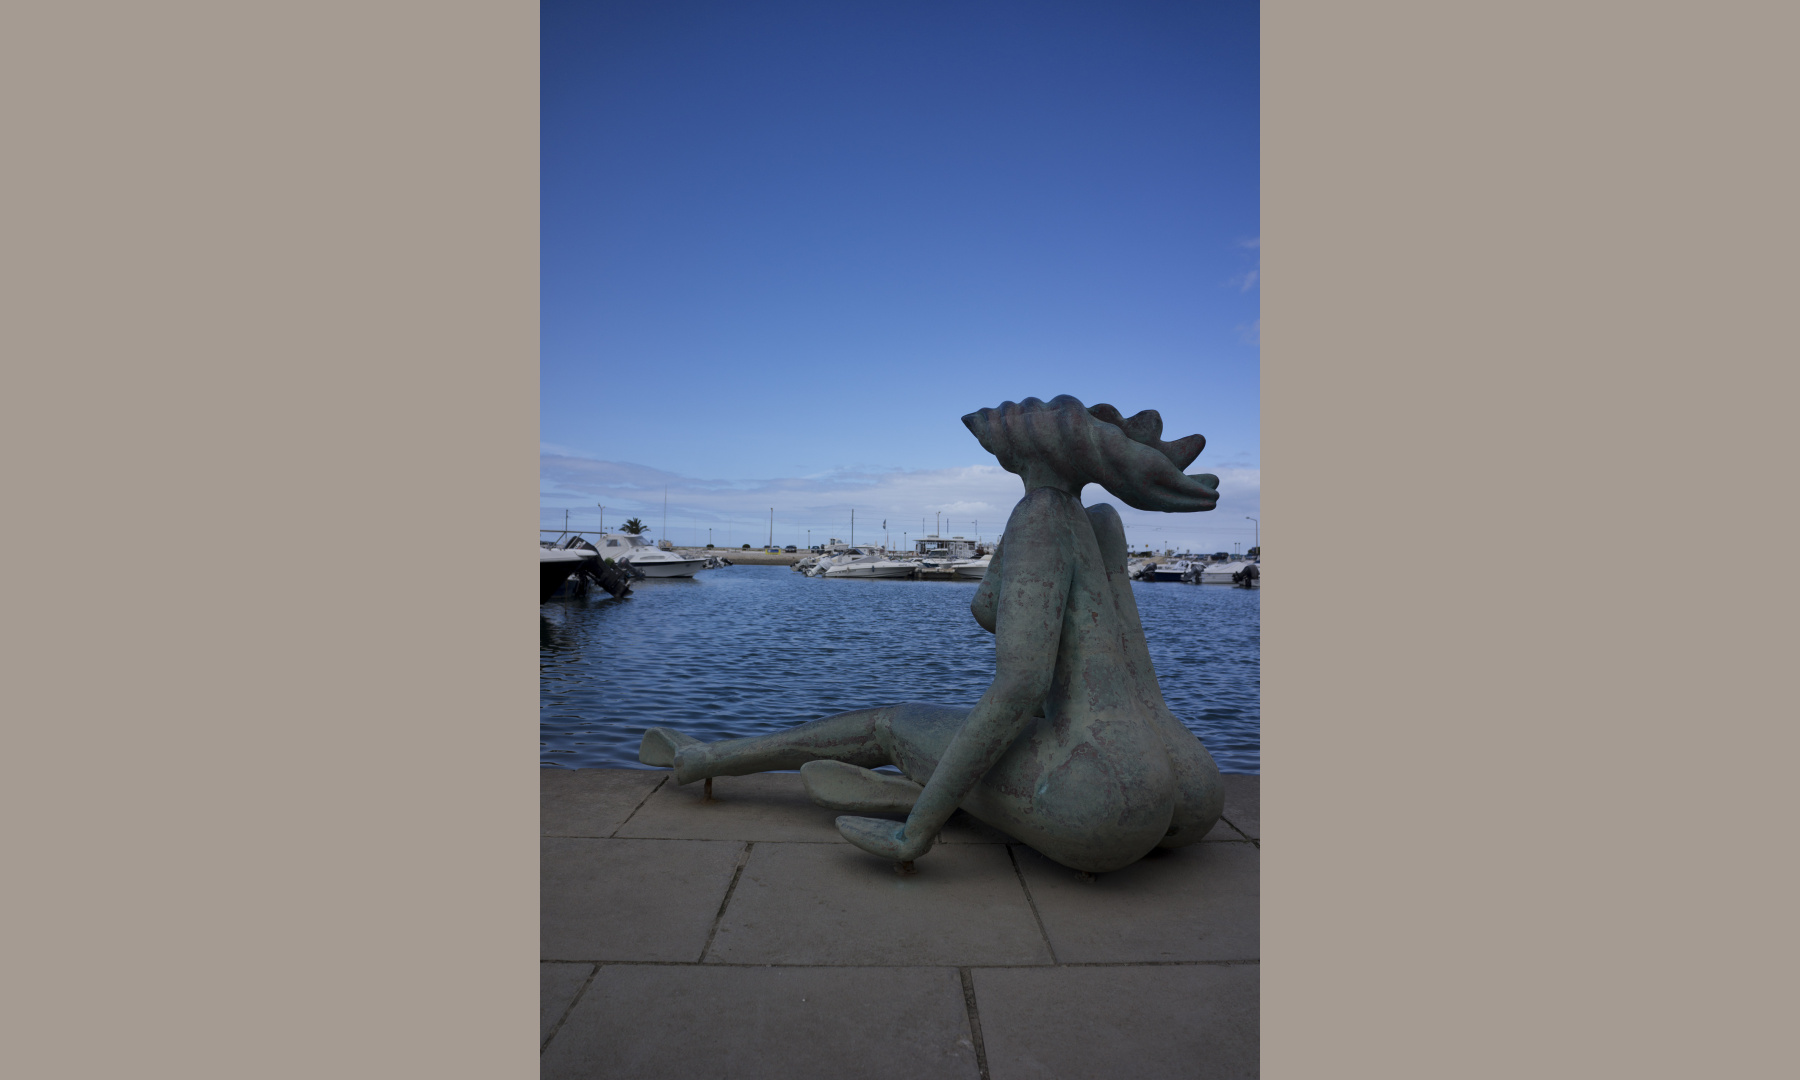 A sculpture at the port of Faro, Portugal